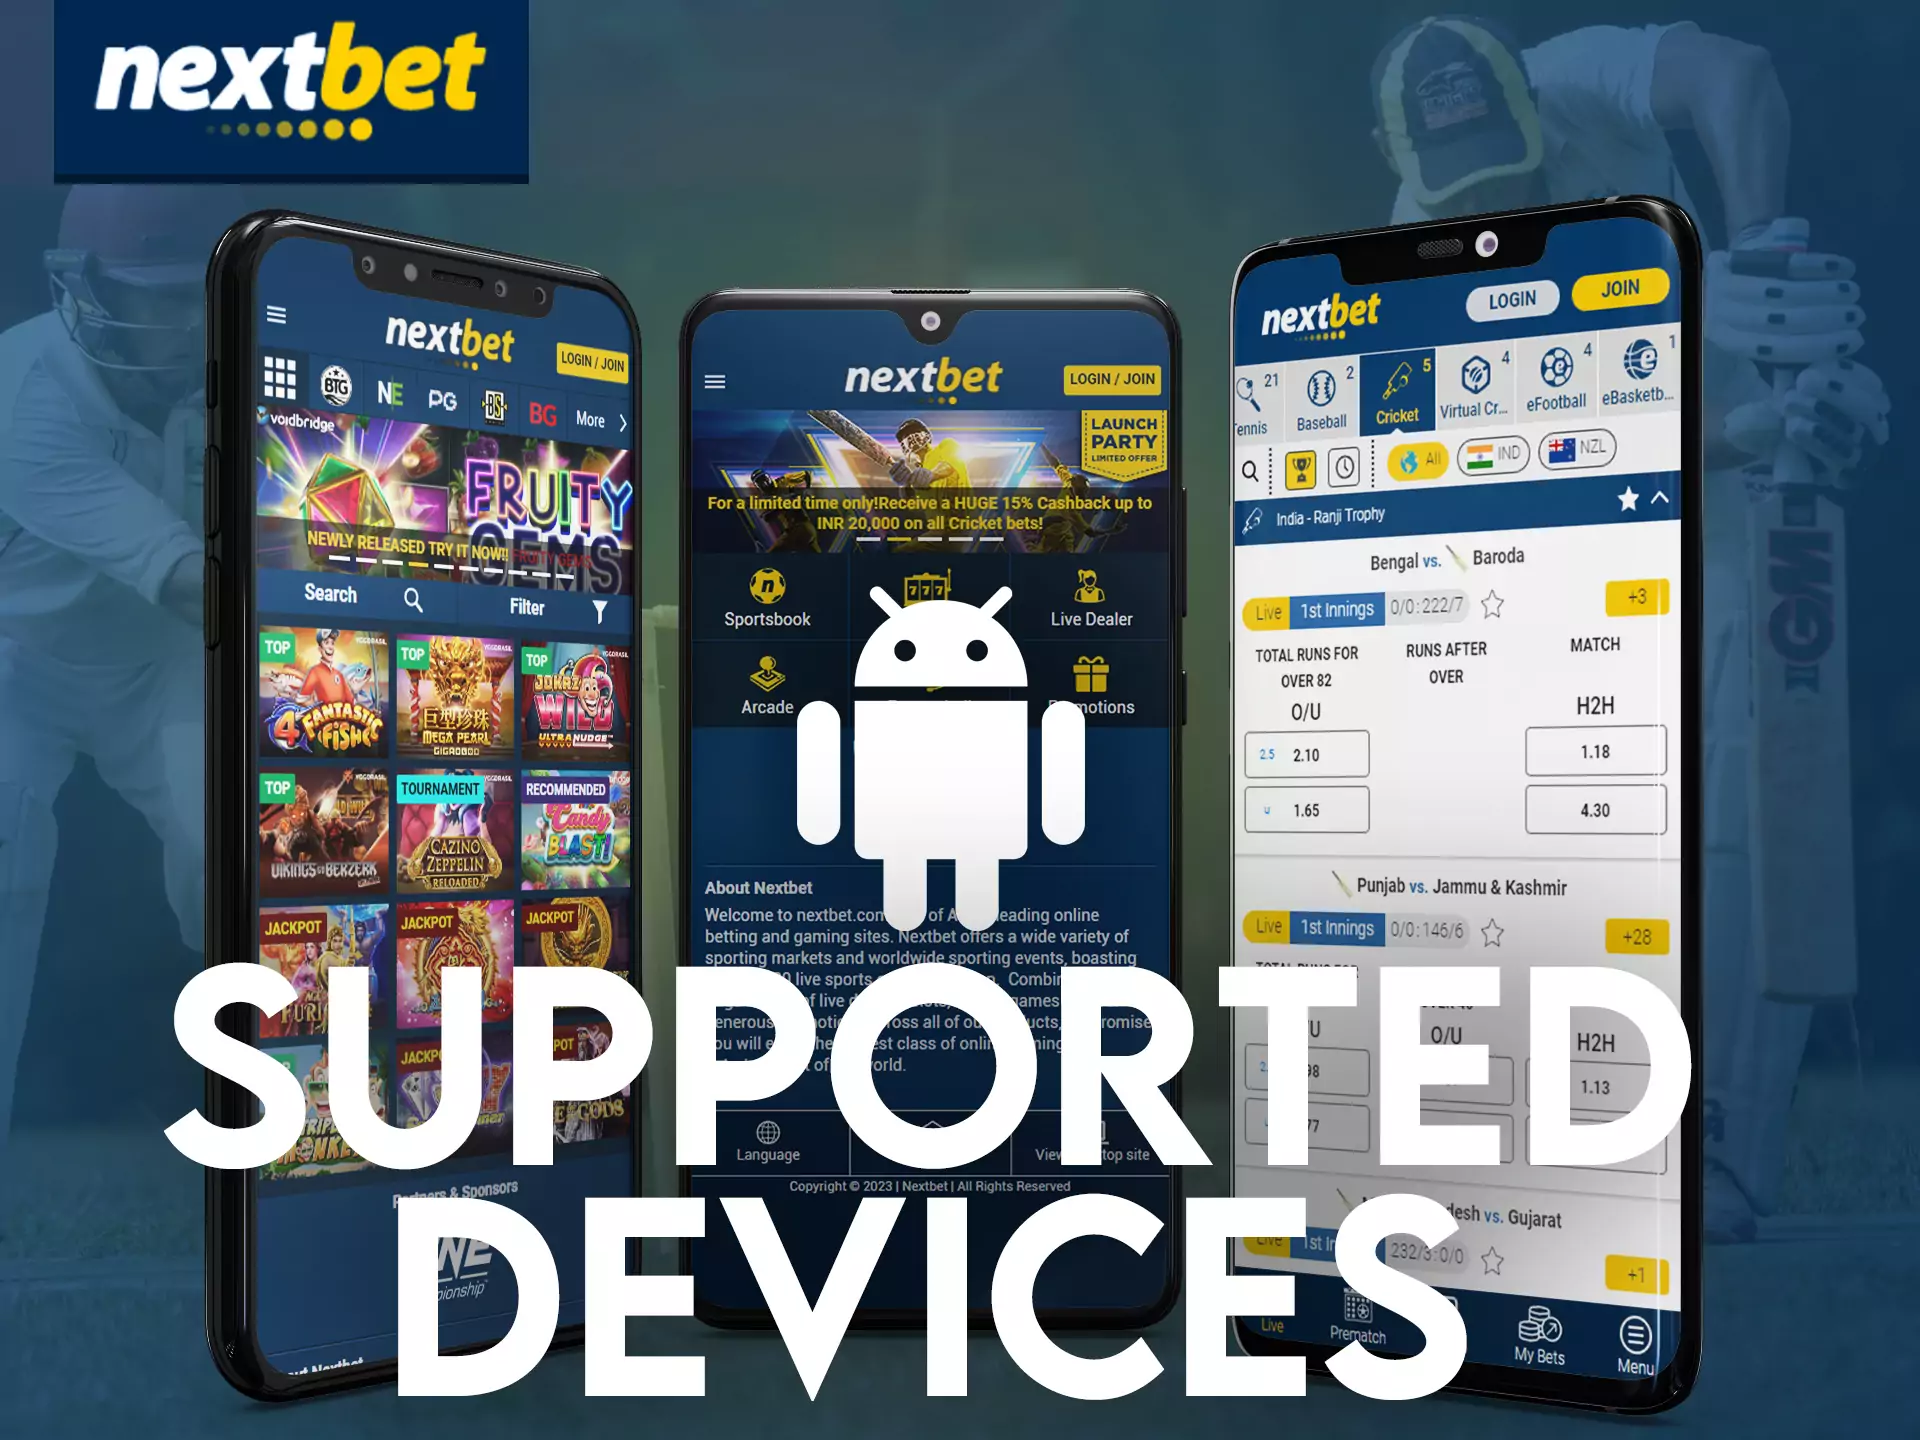 The Nextbet app supports many Android phone models.